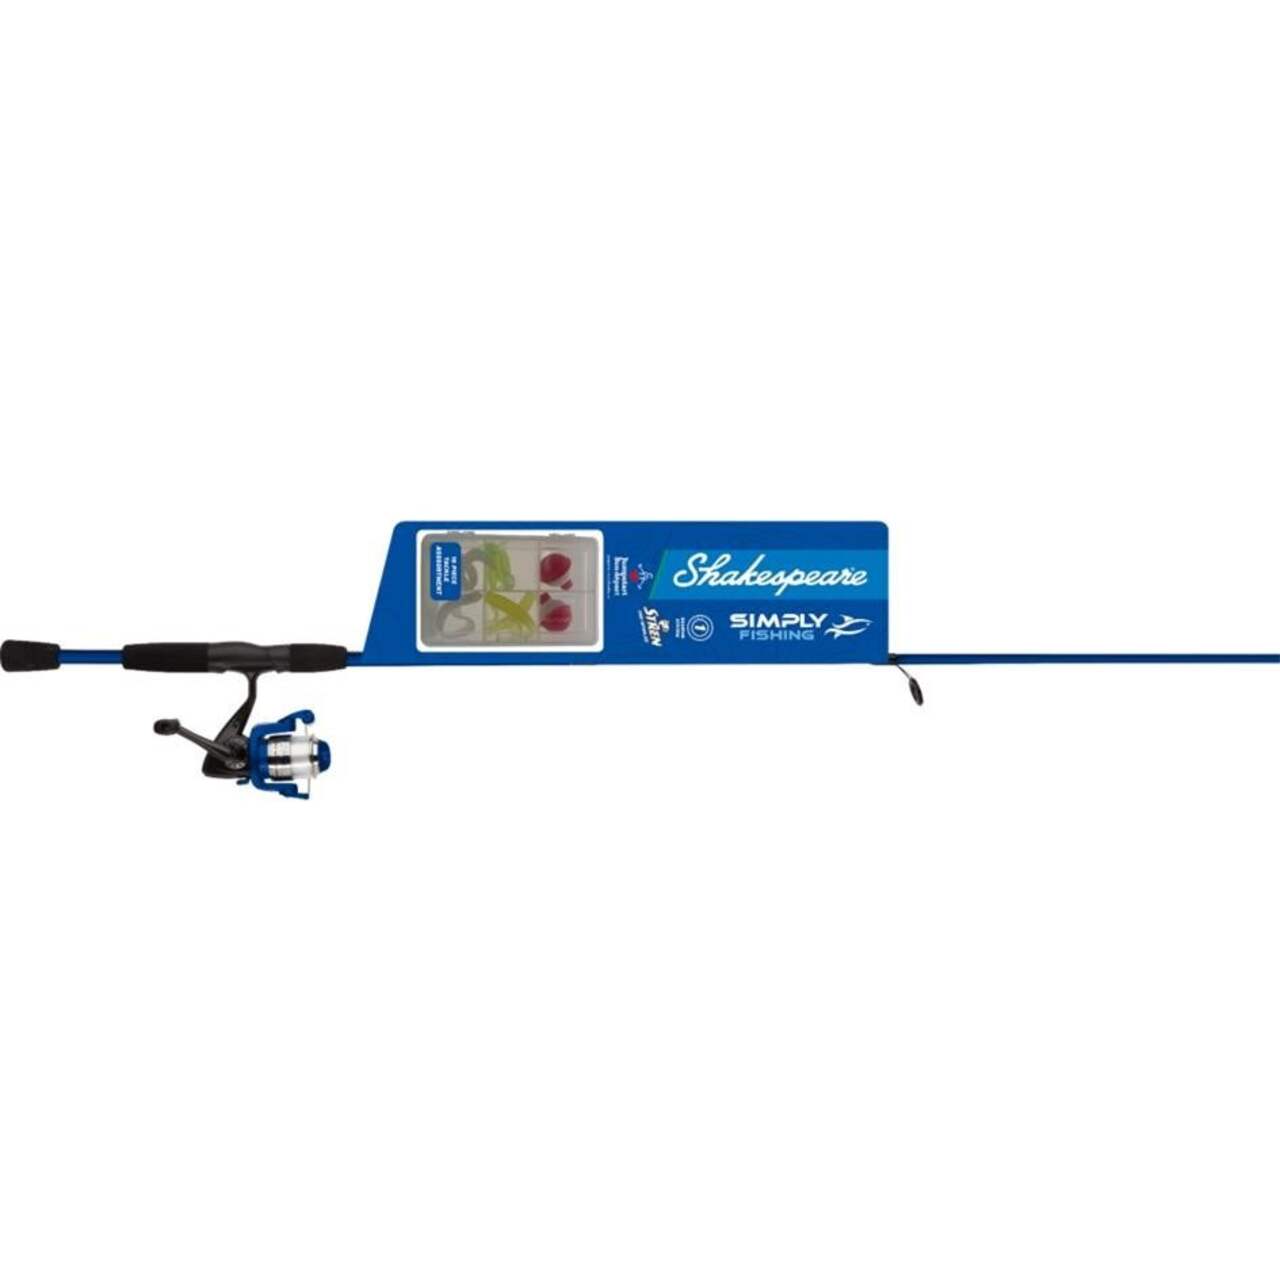 https://media-www.canadiantire.ca/product/playing/fishing/fishing-equipment/0775457/shakespeare-sf-multi-species-spinning-combo-6-6--a2831dce-556a-4019-8eae-4aeda5db57e2.png?imdensity=1&imwidth=1244&impolicy=mZoom